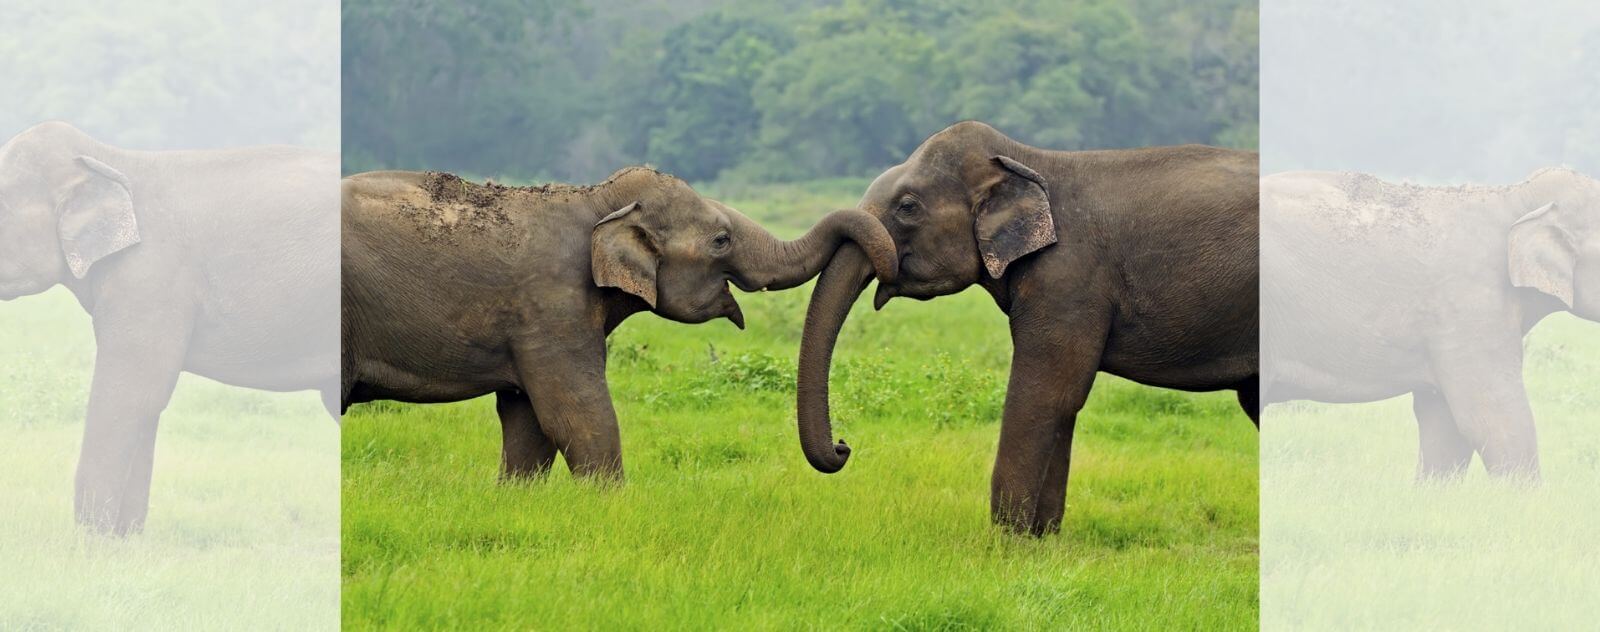 Elephants Who Squeeze Their Trunks to Say Hello